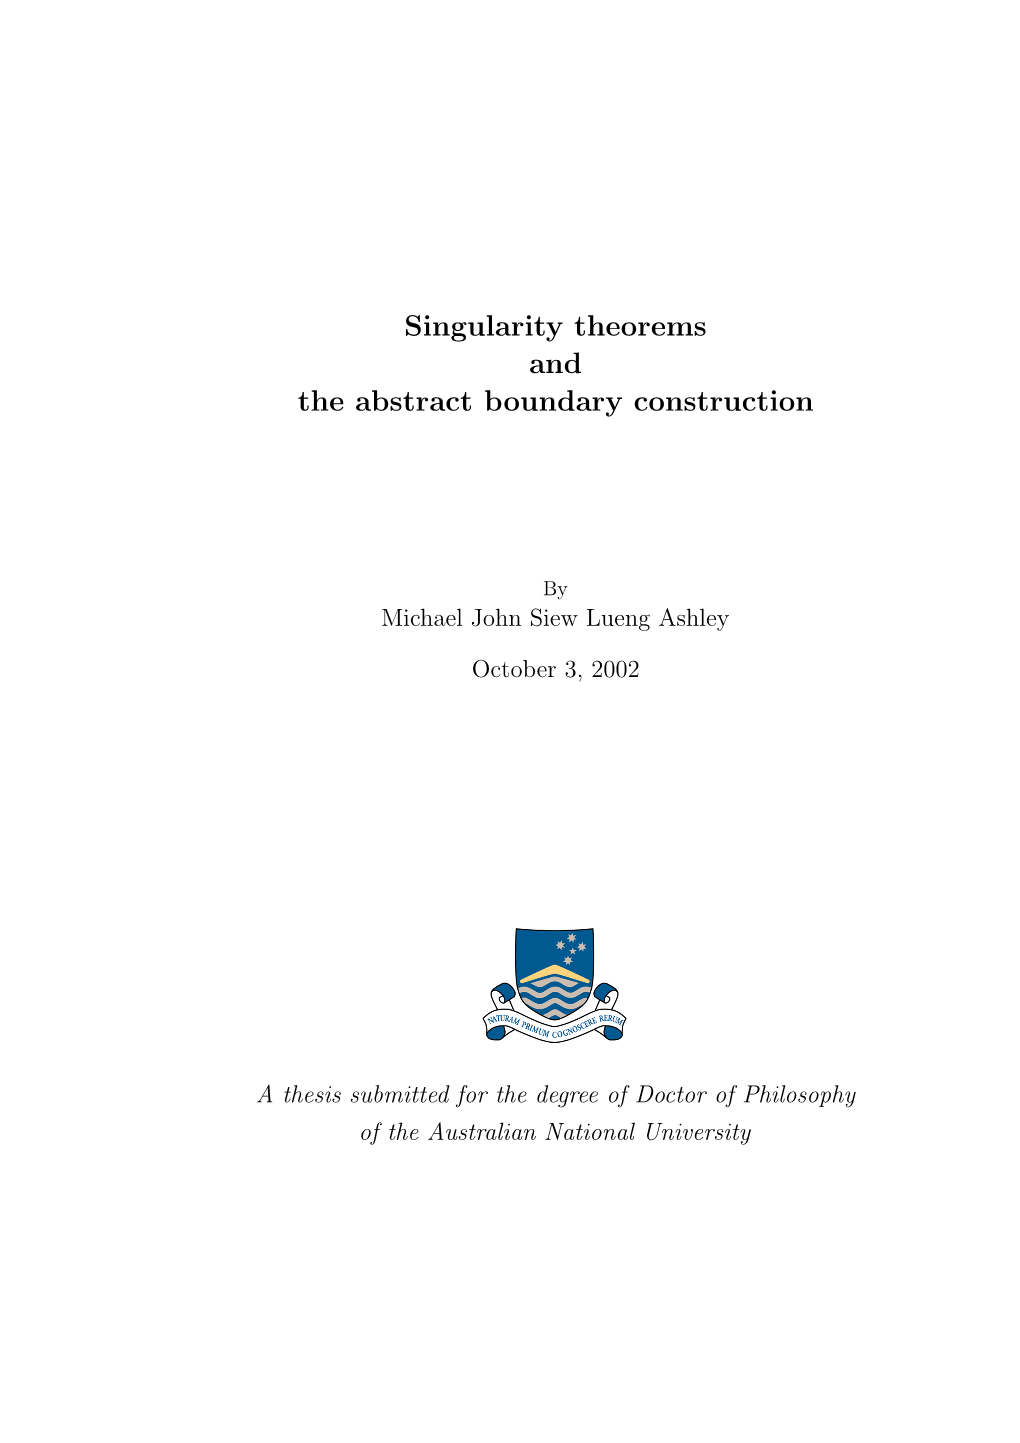 Singularity Theorems and the Abstract Boundary Construction